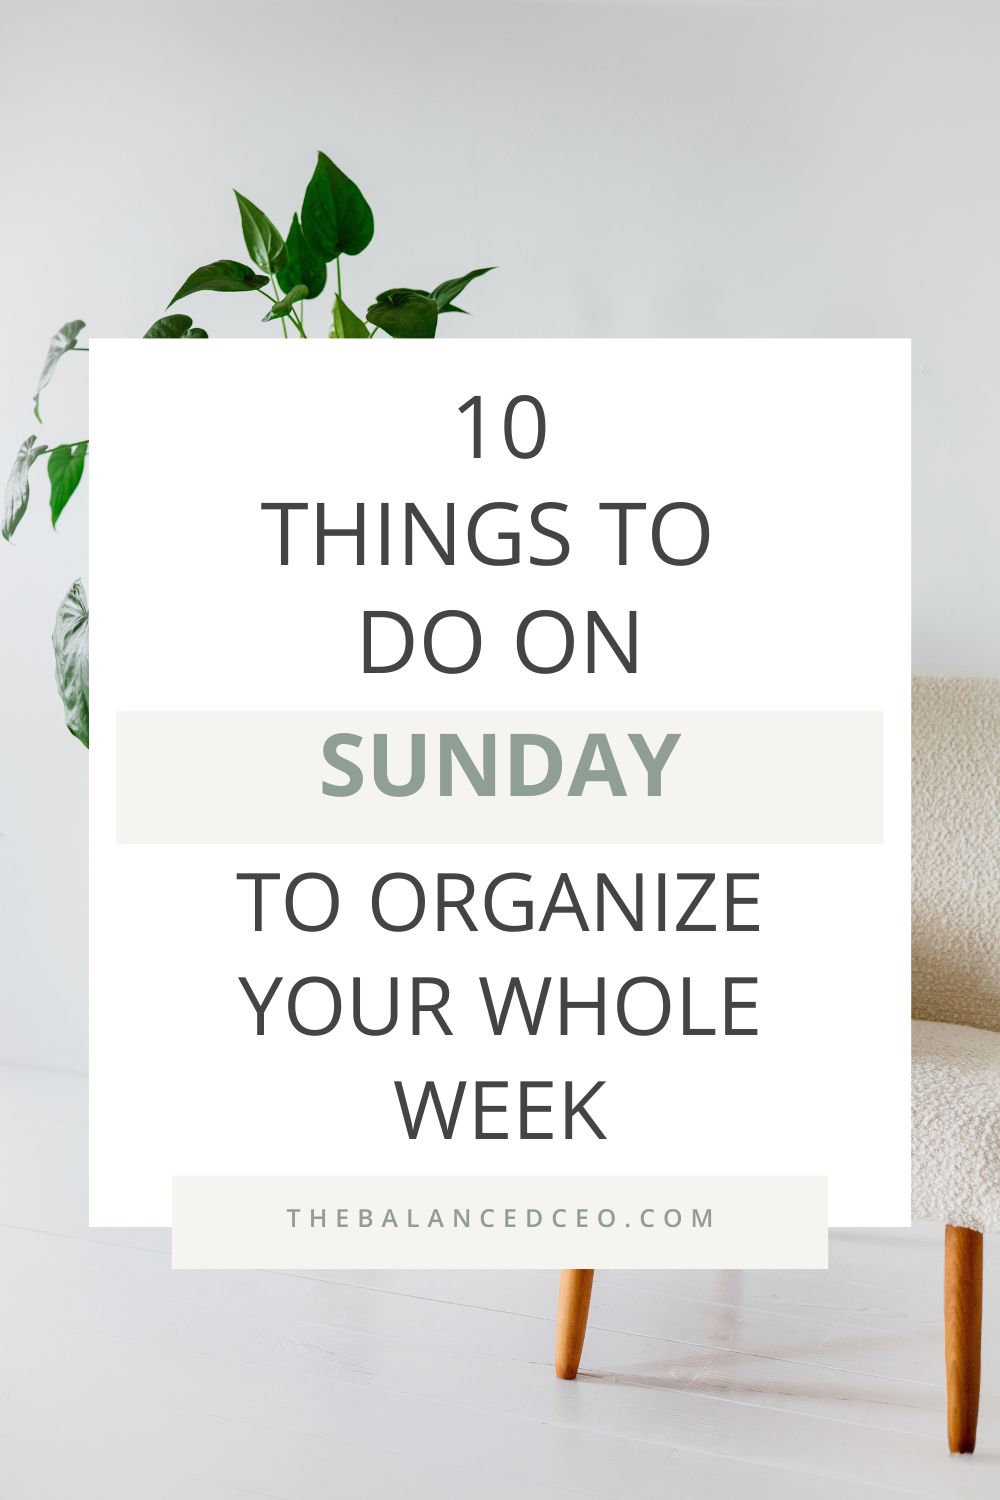 10 Things To Do On Sunday To Organize Your Whole Week